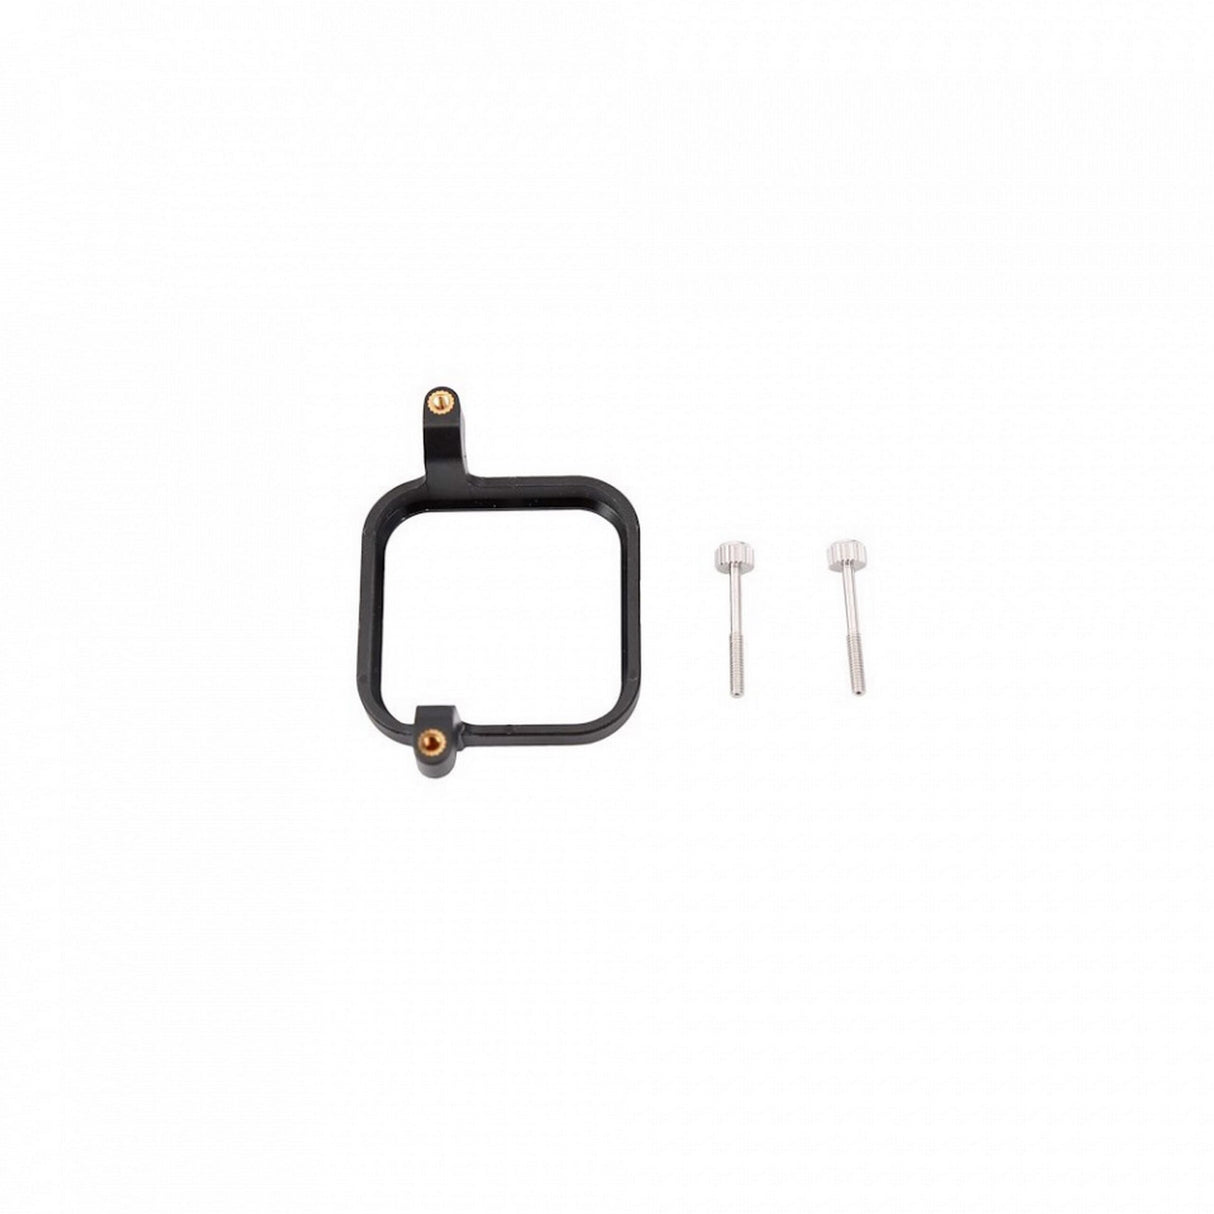 FeiyuTech FY A028 Session Adapter for GoPro Hero